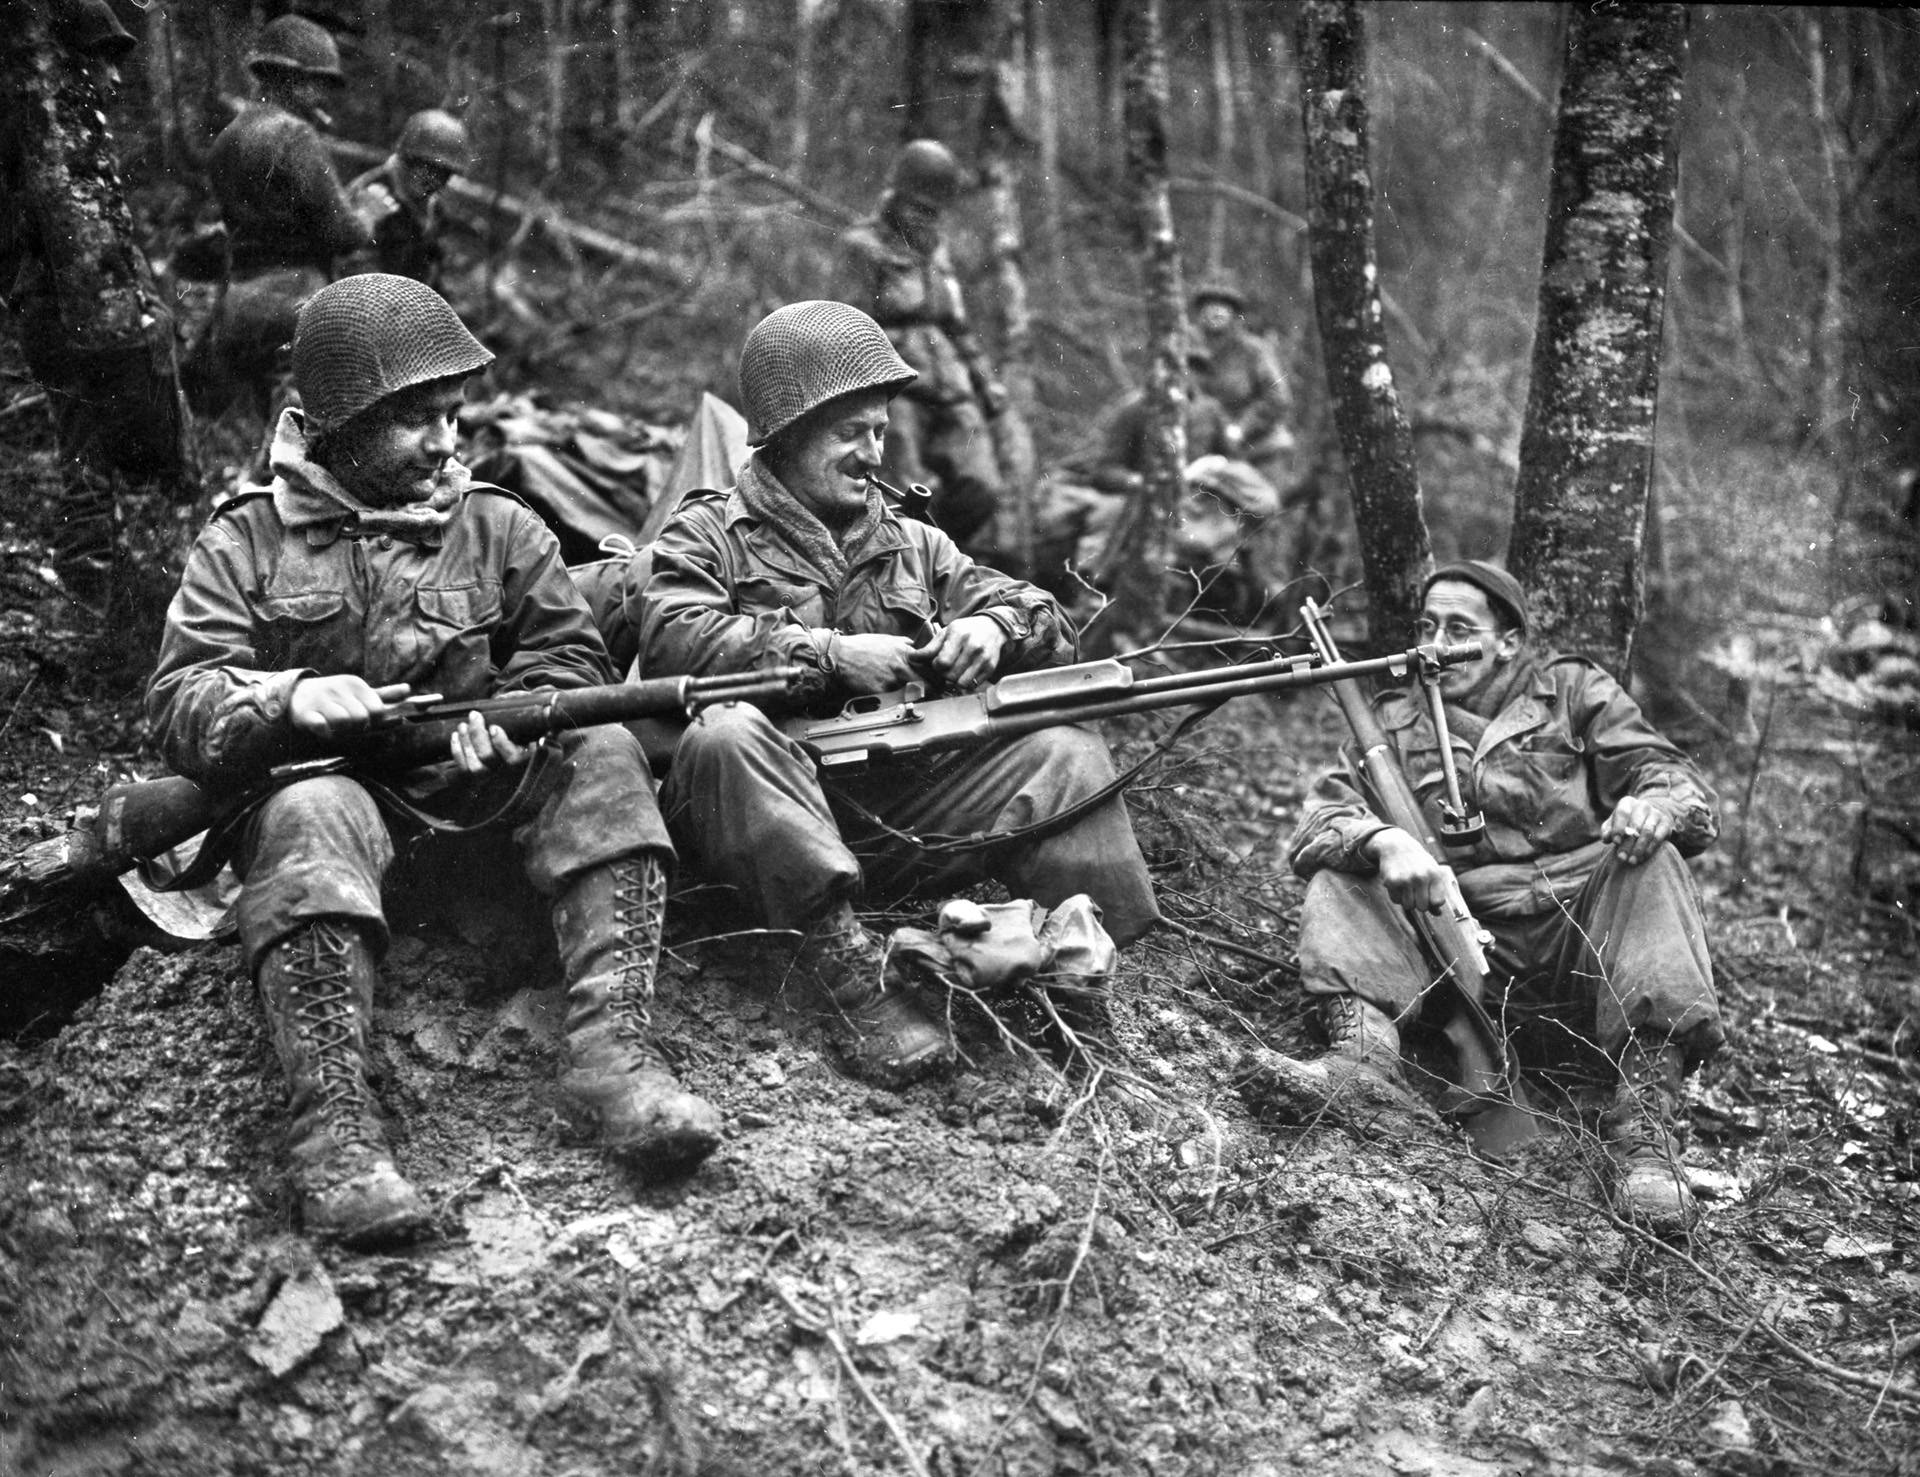 Three Massachusetts soldiers of the 417th Regiment, 75th Infantry Division, clean their weapons as they prepare to move up to the front line near Echternach, Luxembourg, February 8, 1945.